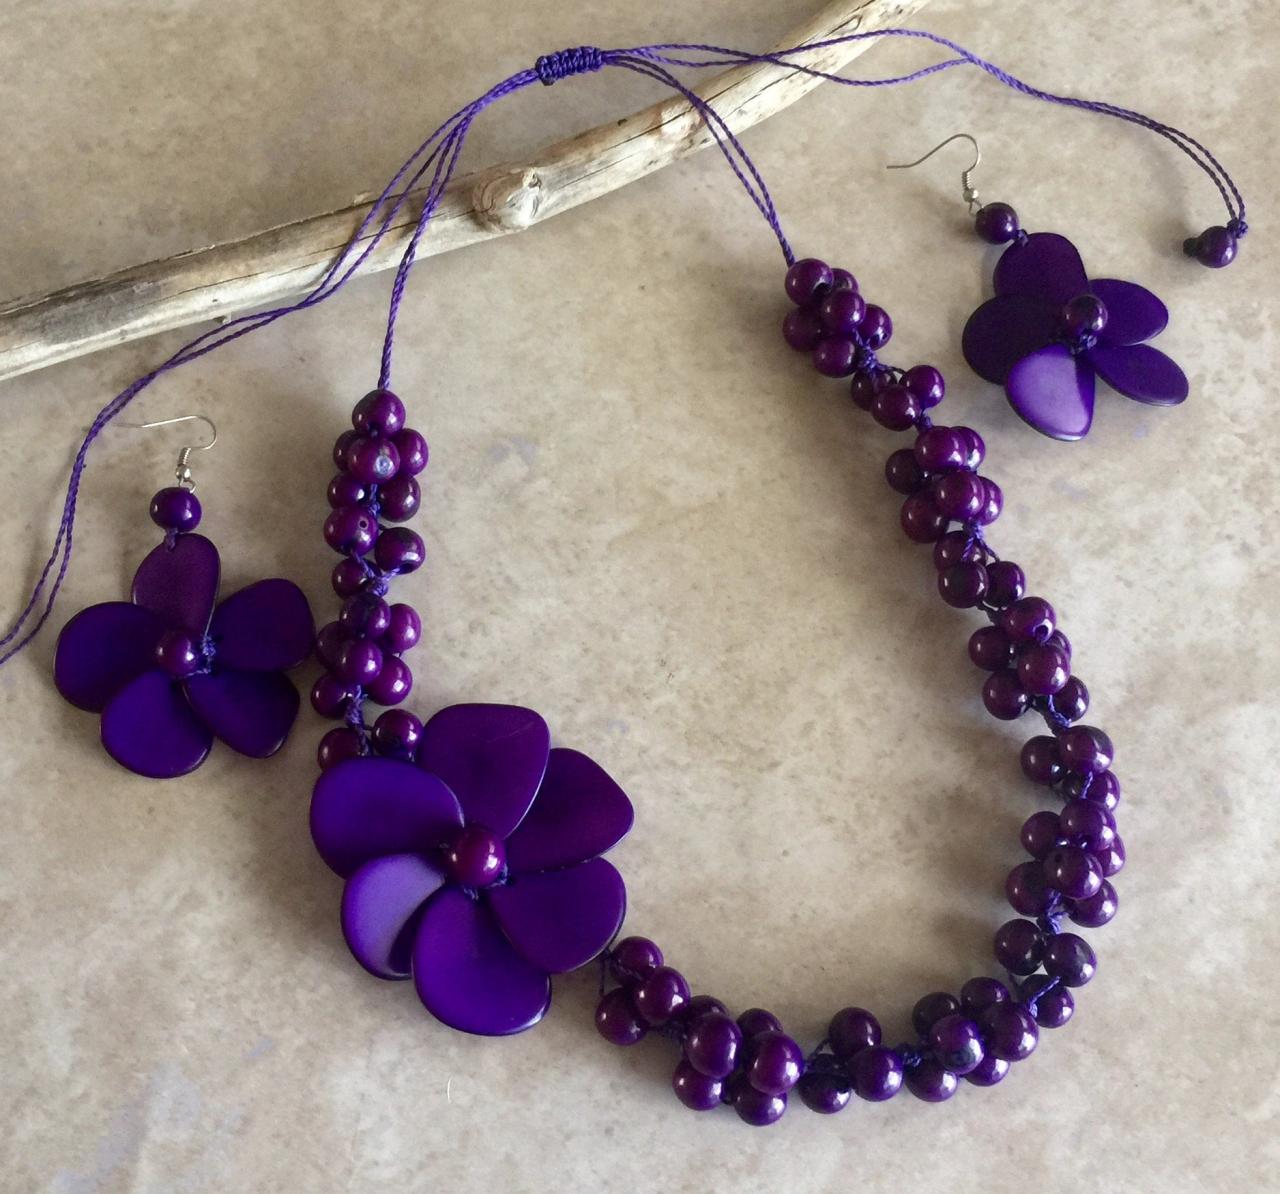 ! Purple Flower Tagua Nut Necklace And Earrings, Acai Seed Necklace, Statement Necklace, Strand Neck, Chunky Neck, Adjustable Necklace